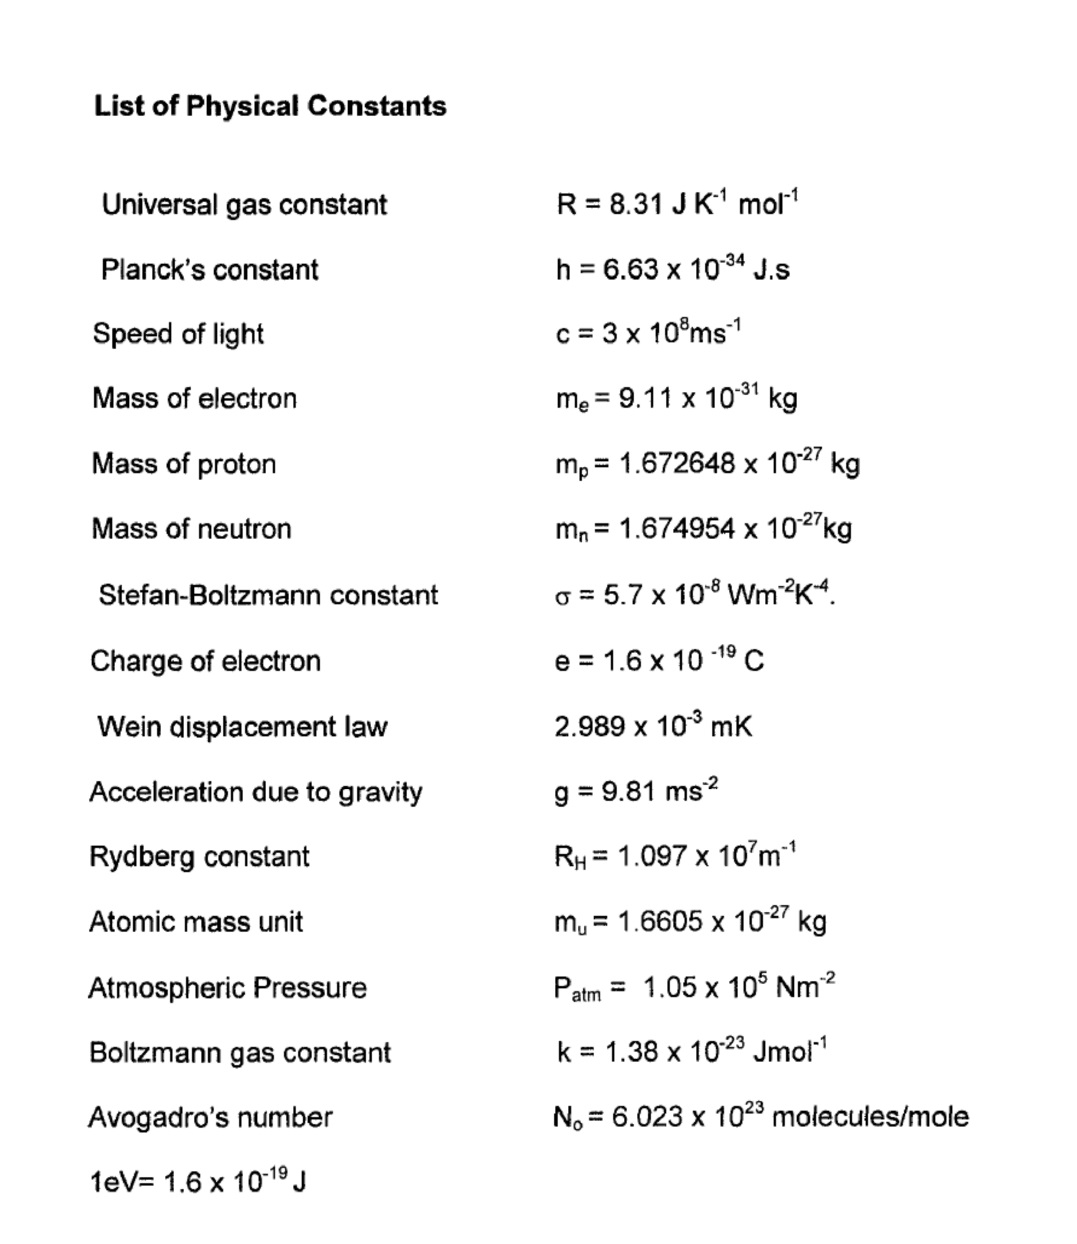 All My Subjects: PHY310; LIST of Physical Constants